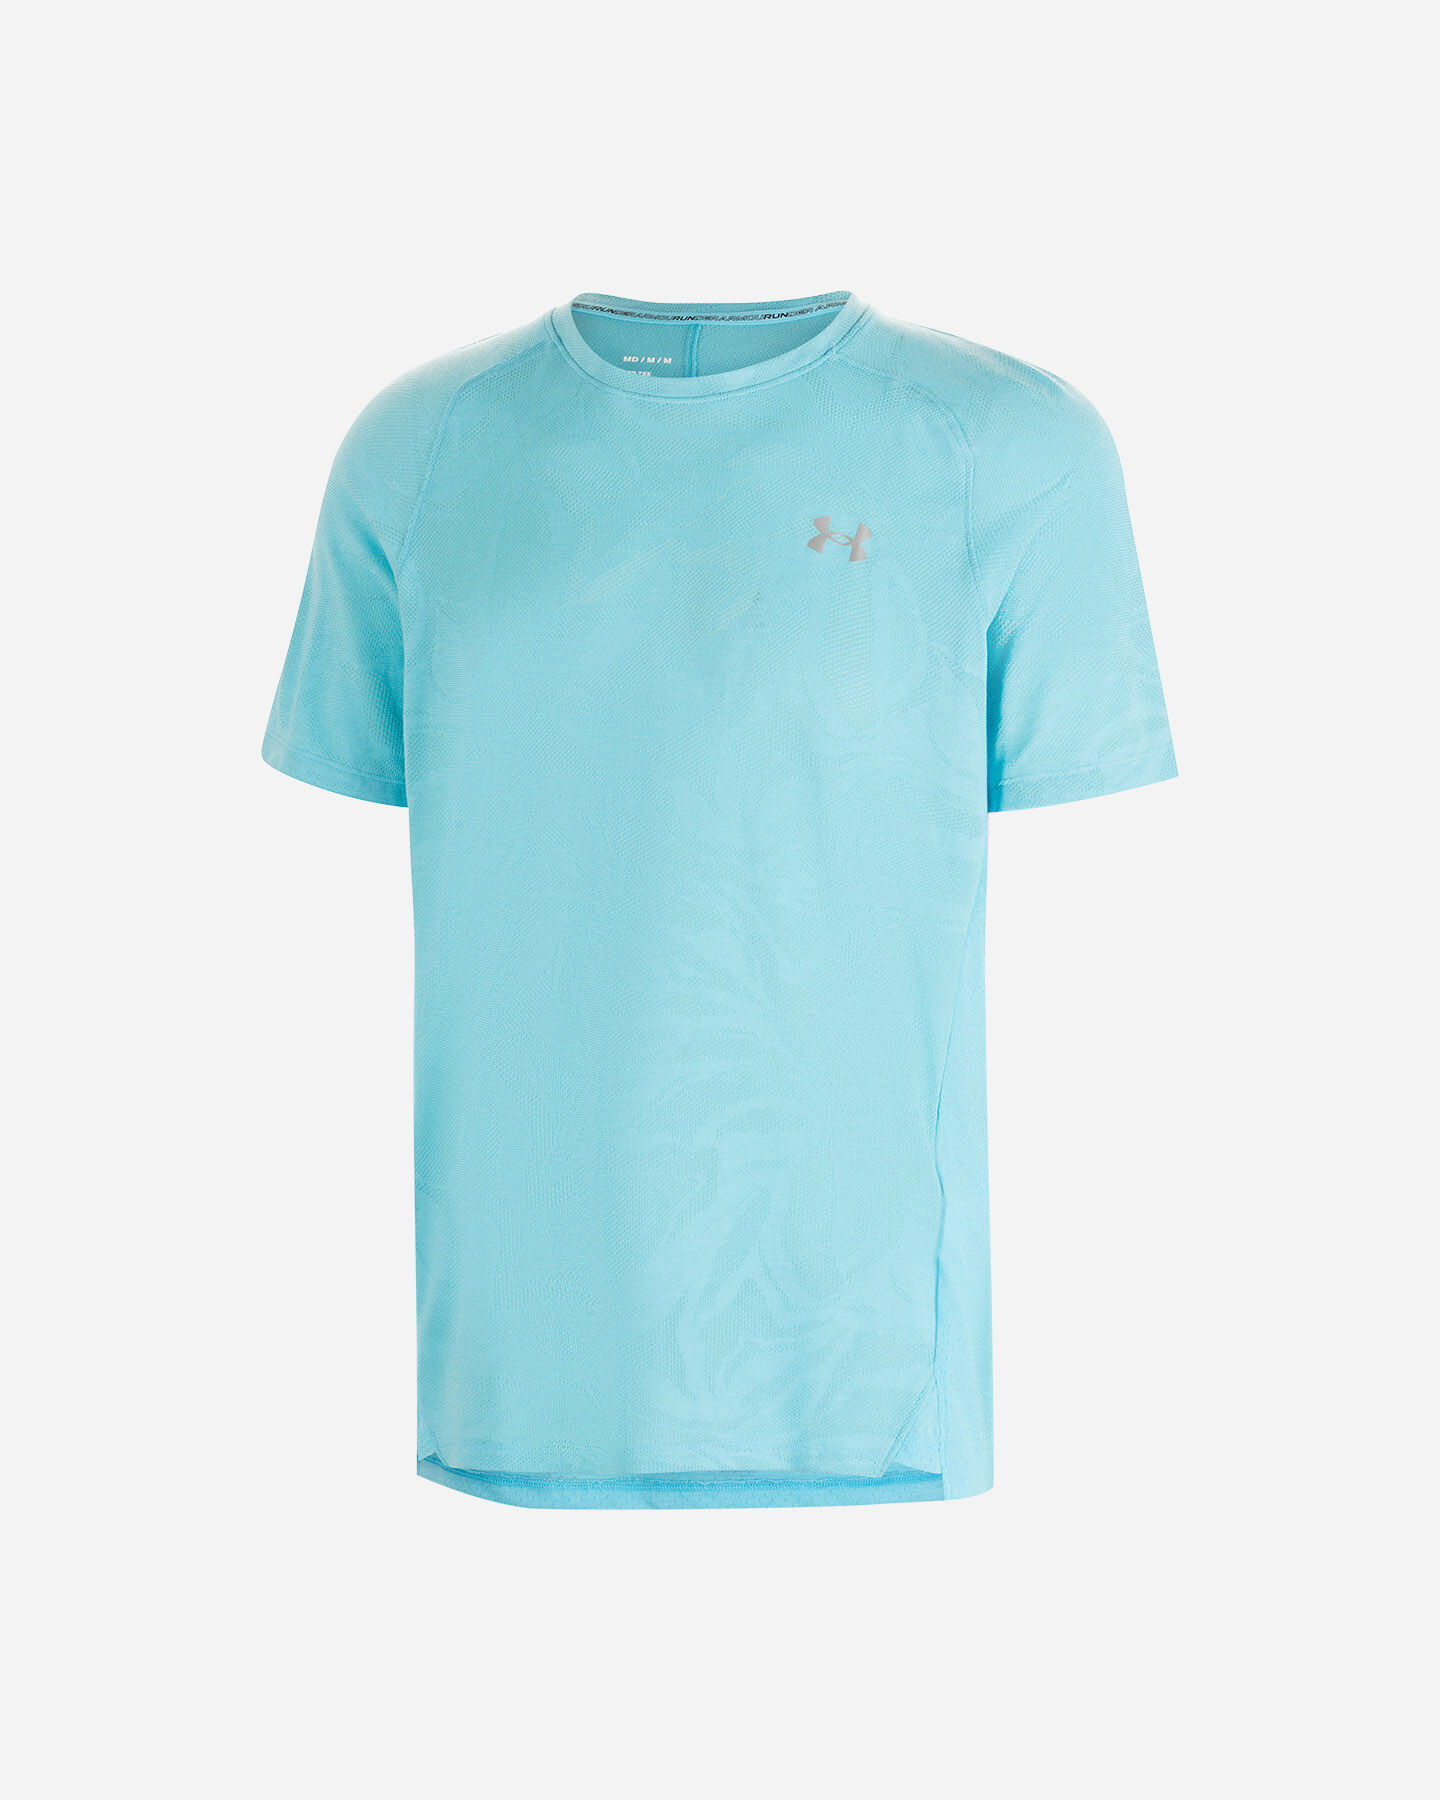  T-Shirt running UNDER ARMOUR STREAKER JACQUARD M S5390151|0481|SM scatto 0